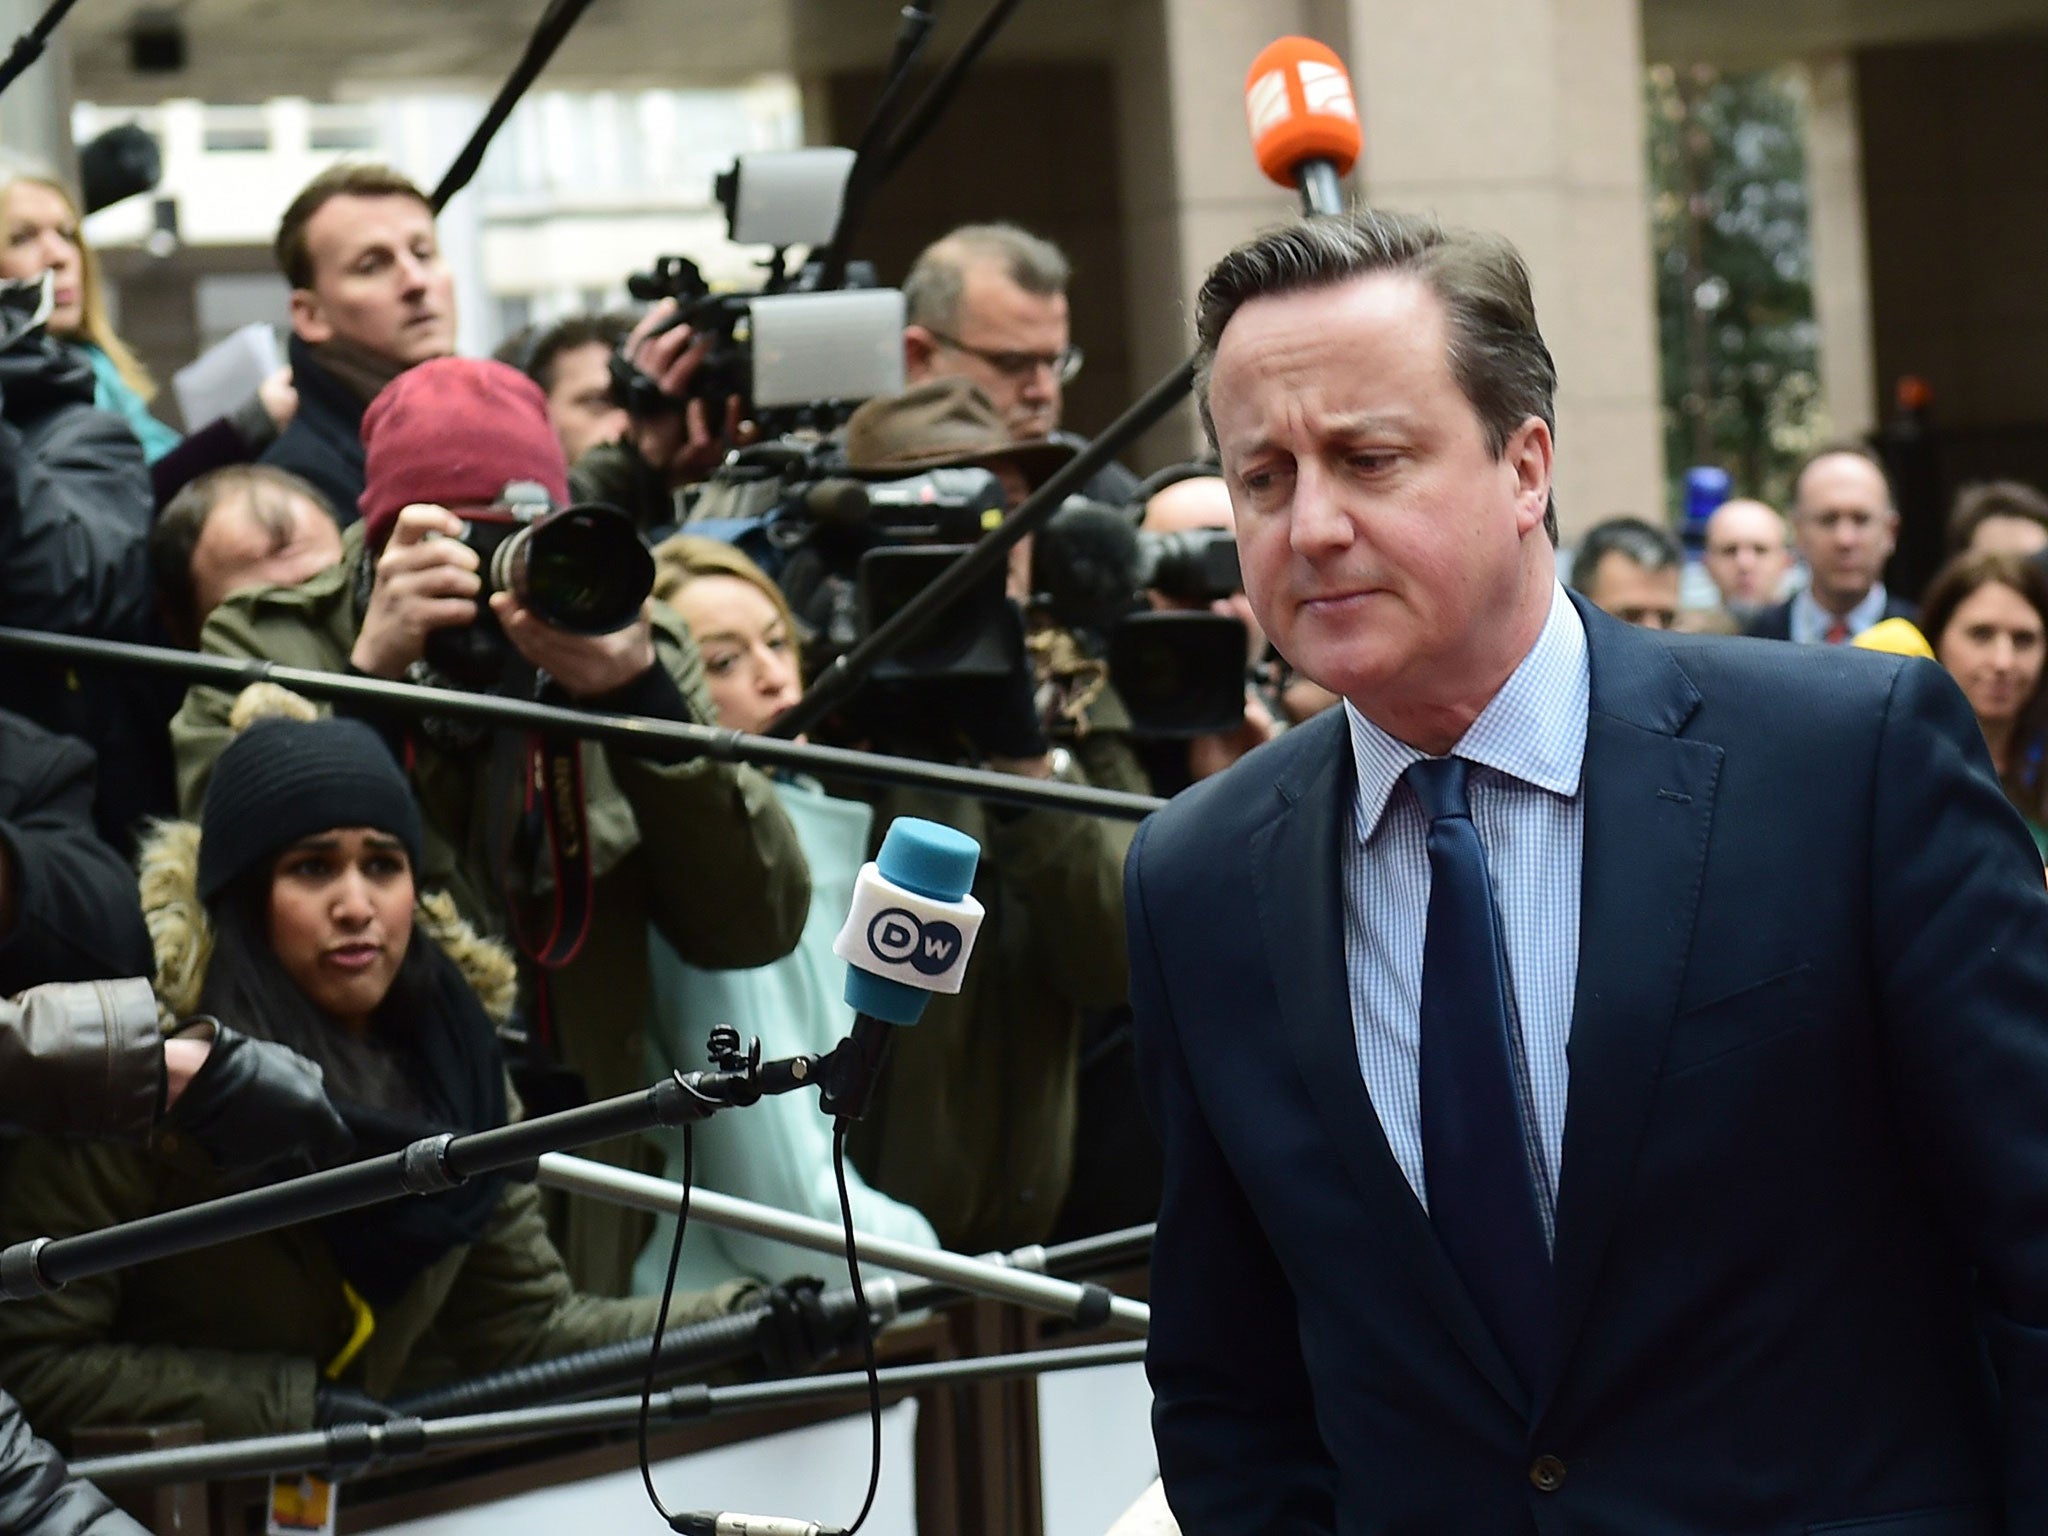 Britain’s Prime Minister David Cameron arrives for an EU summit meeting, at the European Union headquarters in Brussels